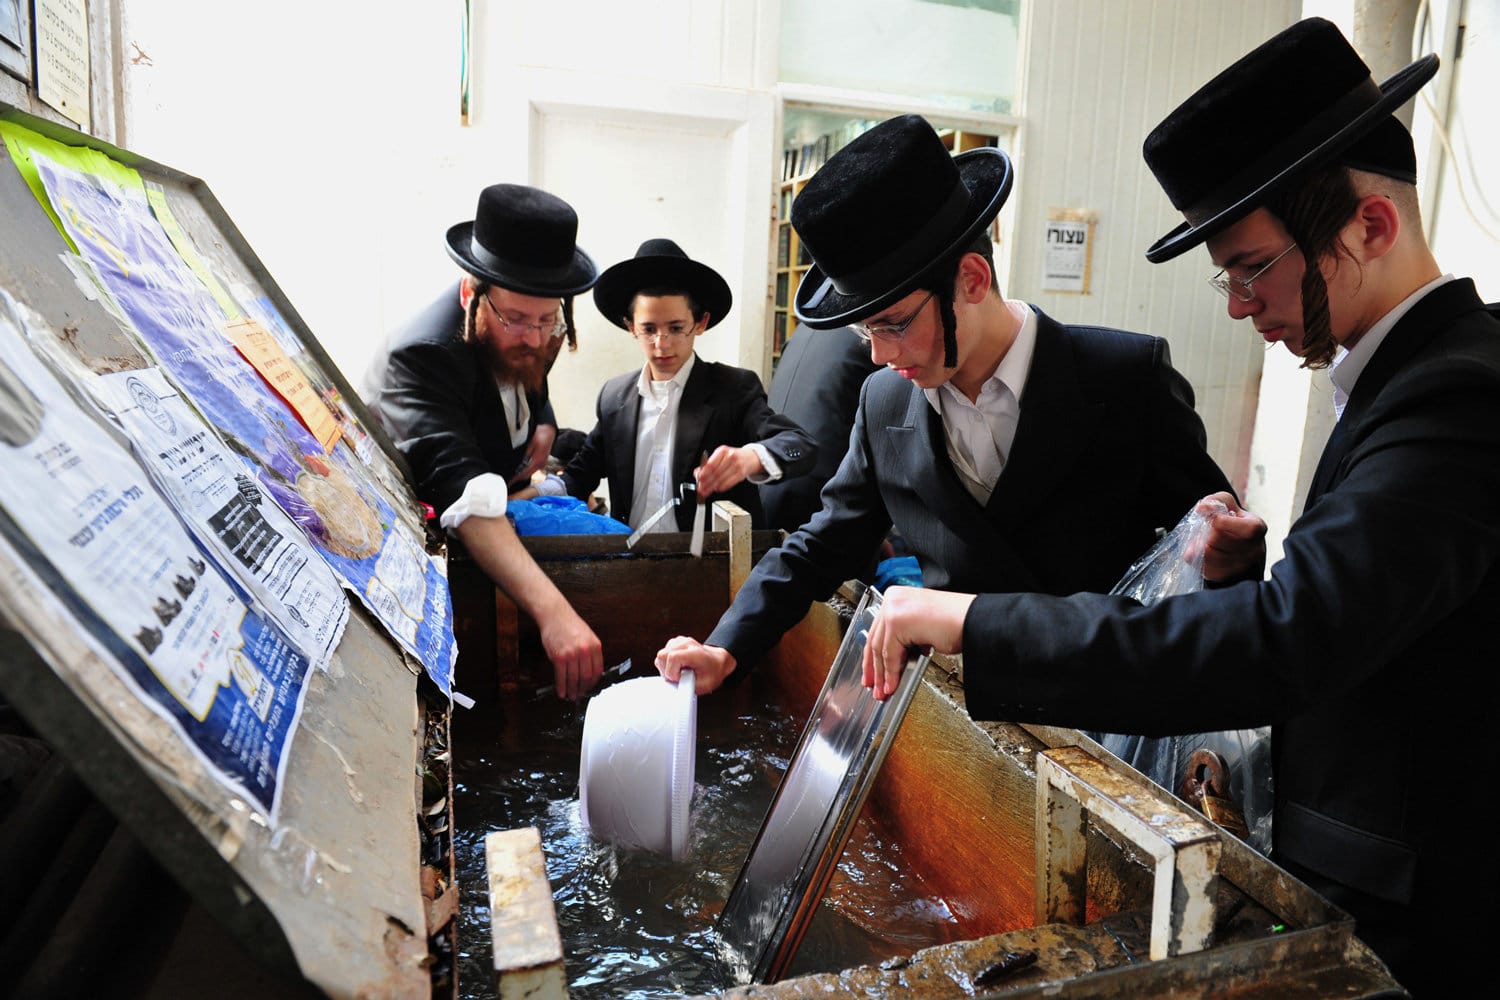 Orthodox Jewish men Koshering Appliances According to Jewish law, pots, dishes, and utensils that are used throughout the year absorb leaven and therefore not be used on Passover.